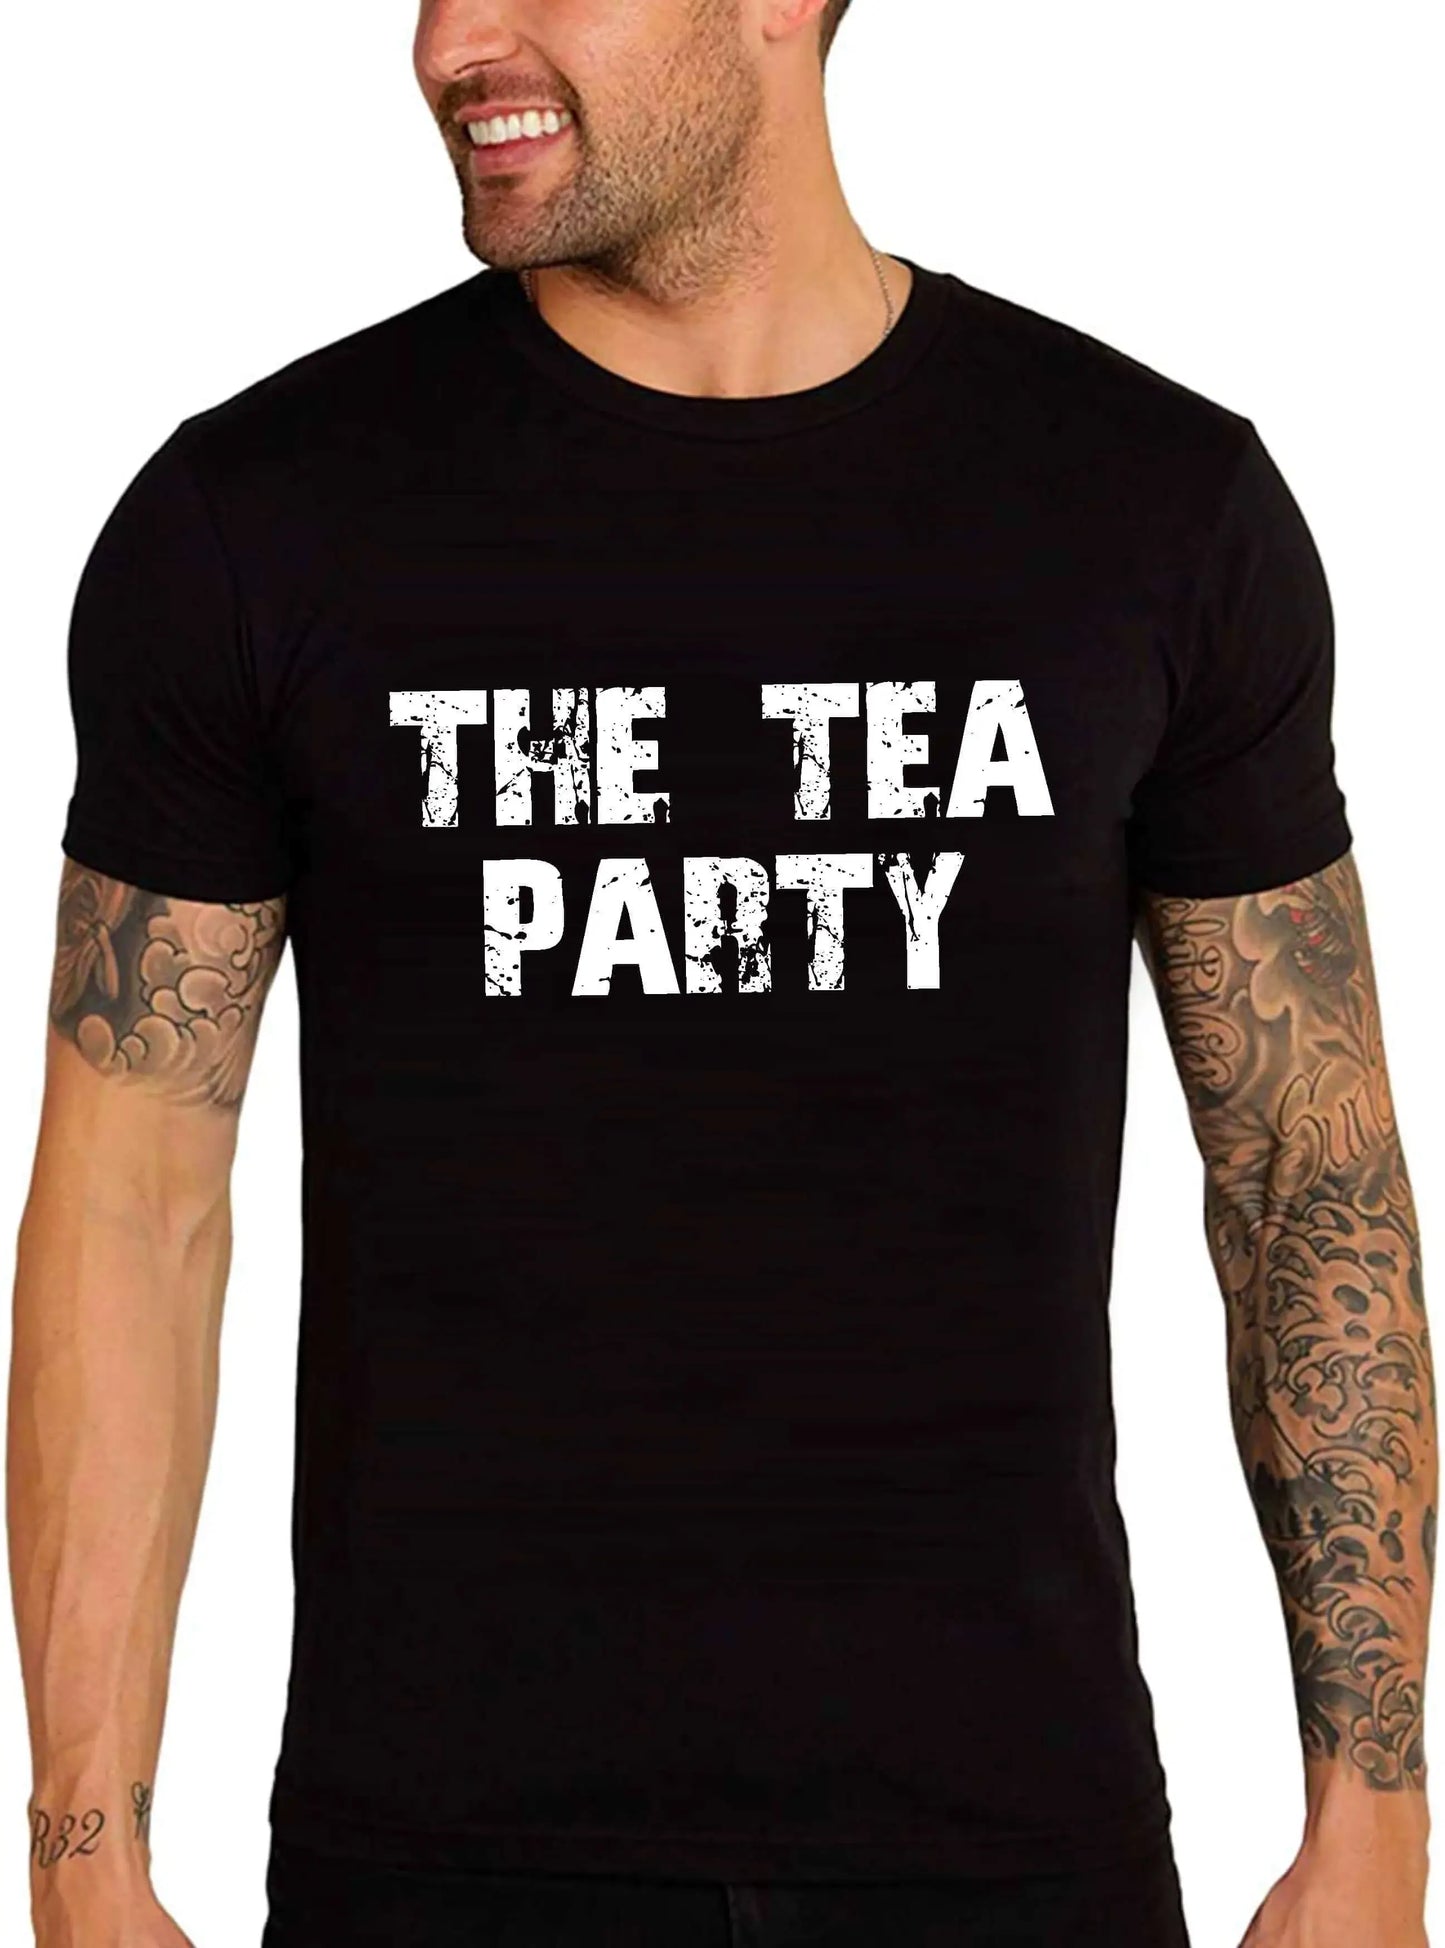 Men's Graphic T-Shirt The Tea Party Eco-Friendly Limited Edition Short Sleeve Tee-Shirt Vintage Birthday Gift Novelty